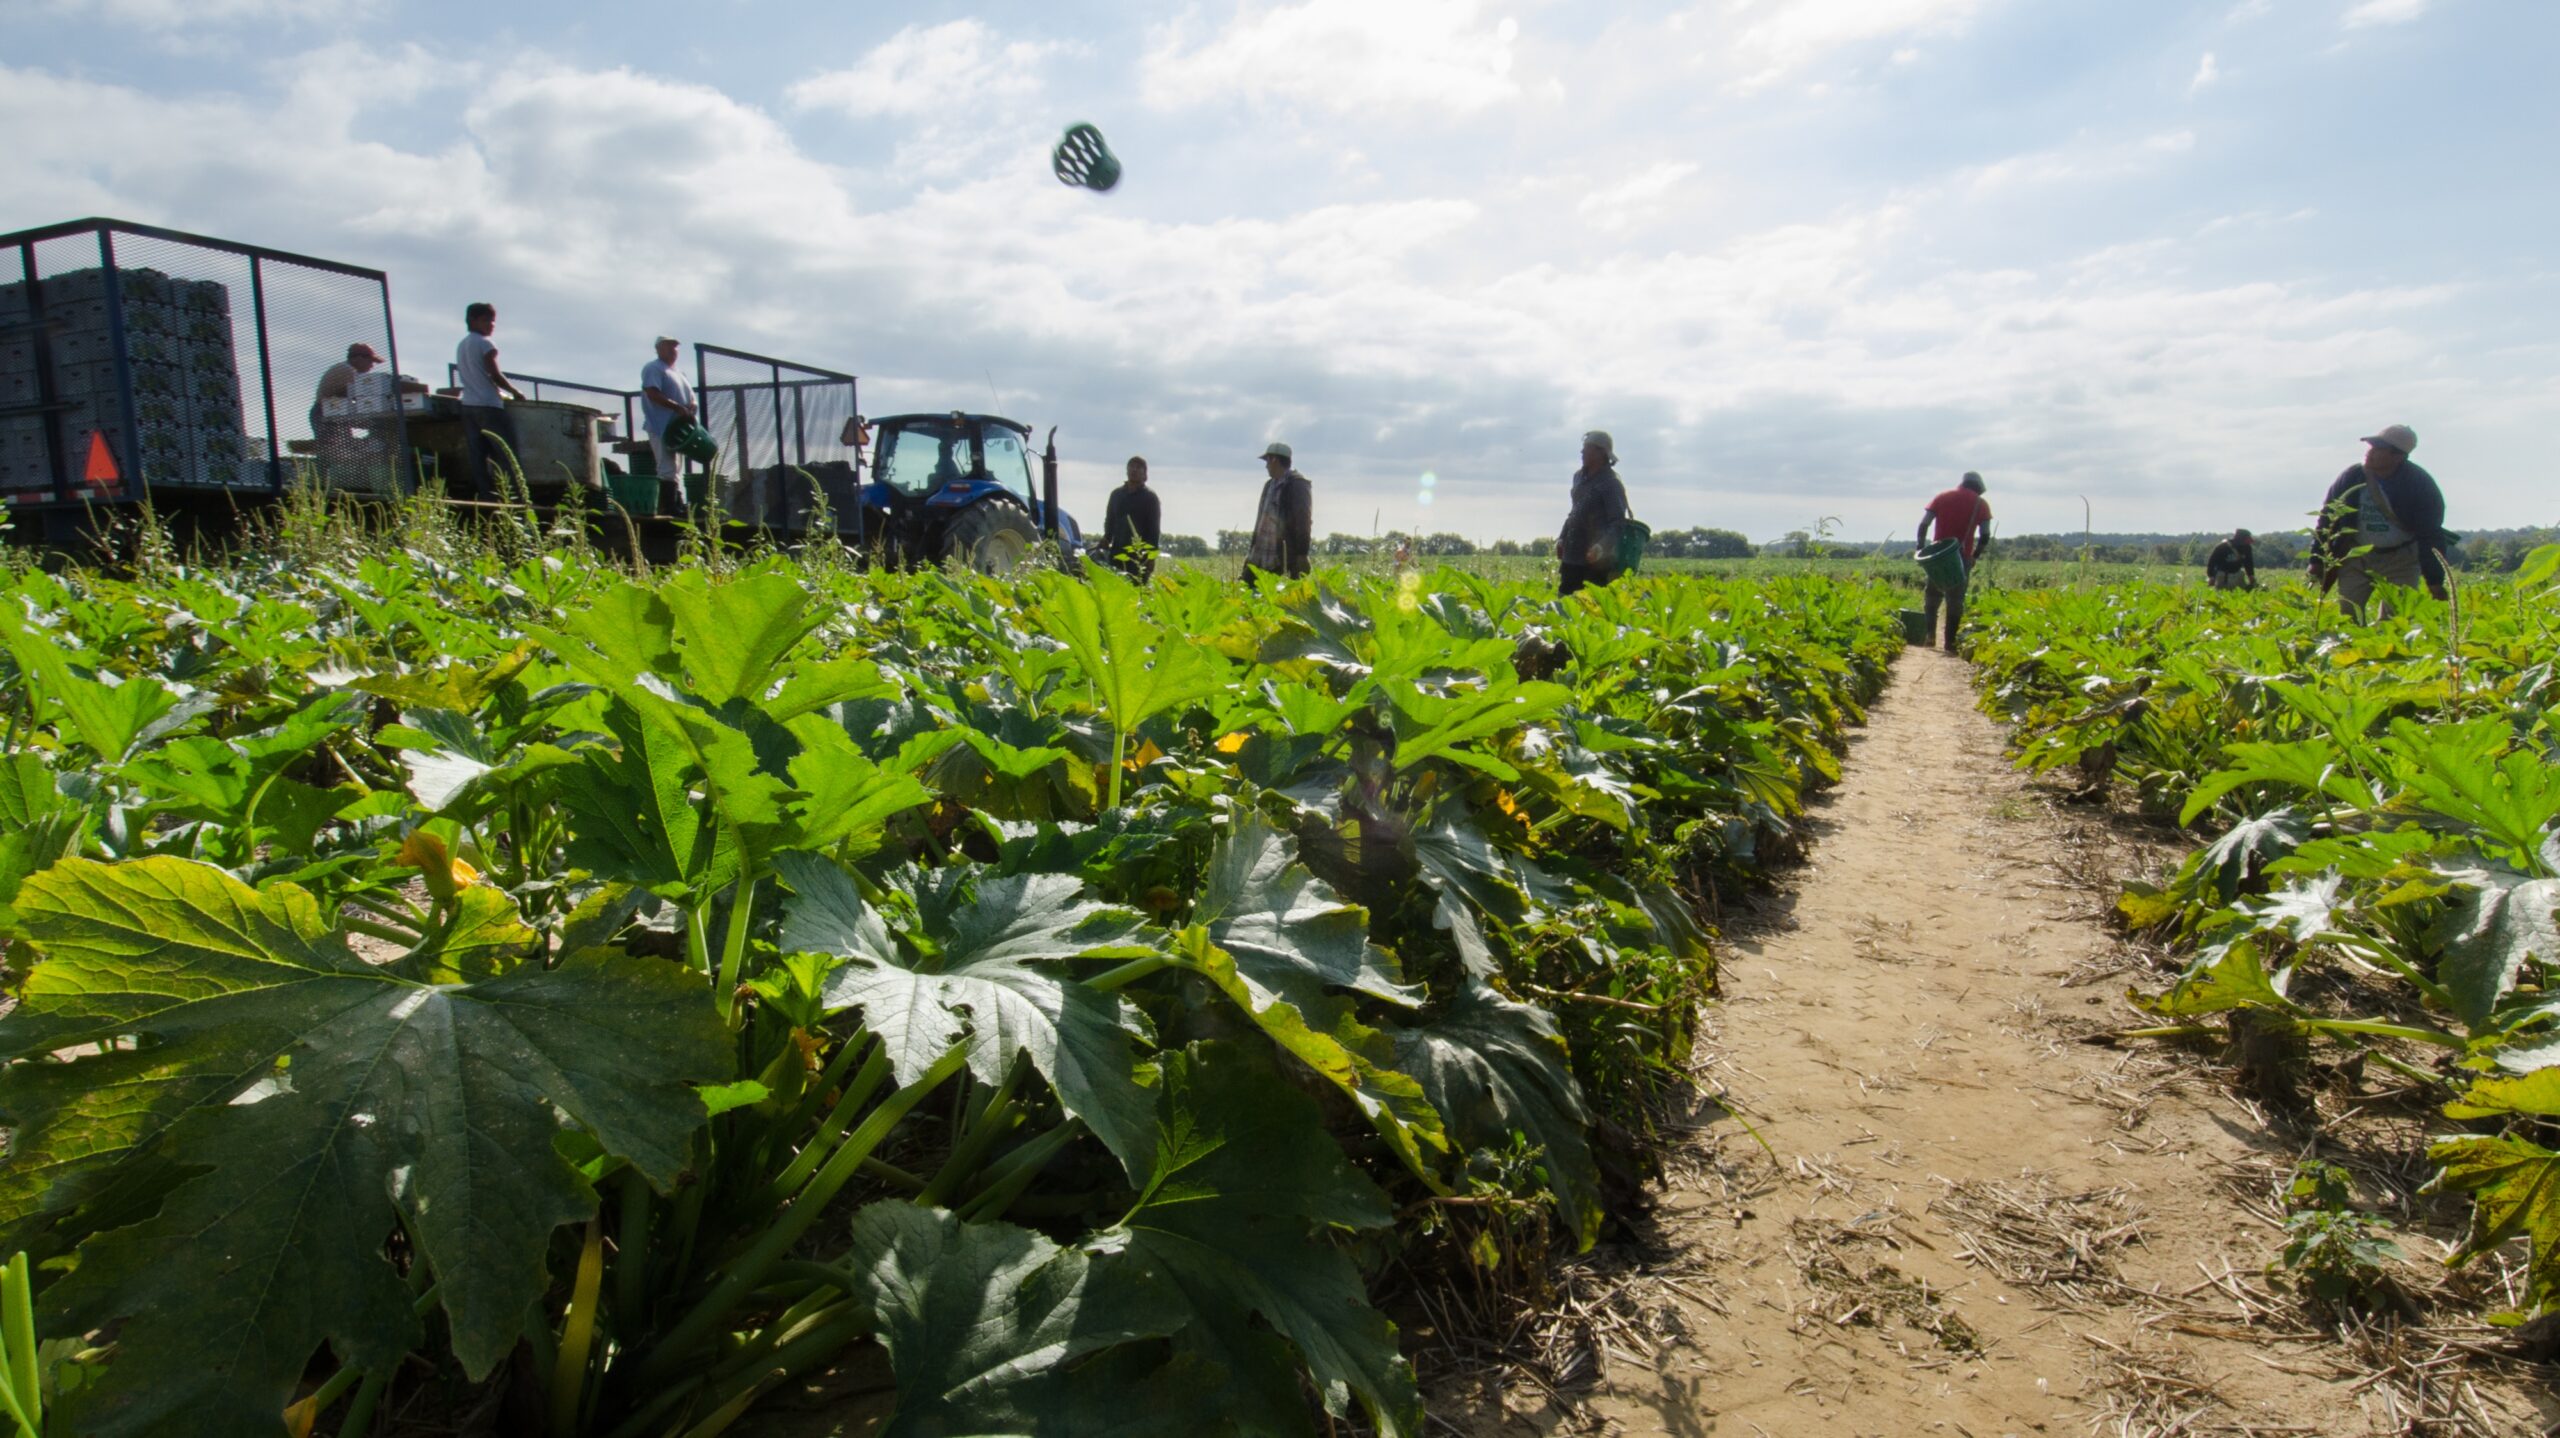 Updated state regulations aim to provide more protections for migrant farm workers